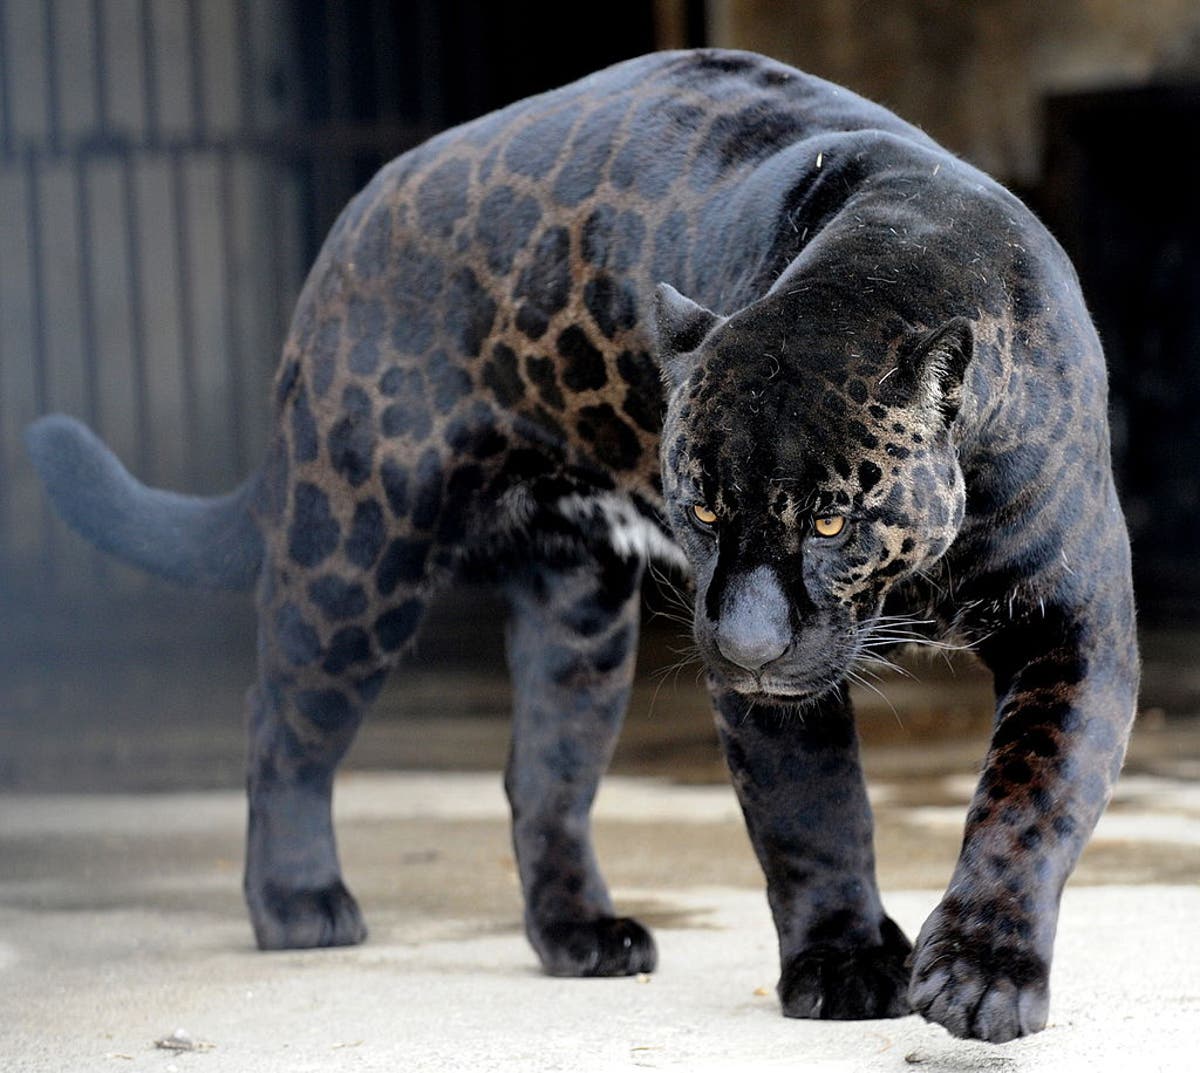 A Texas man claimed he saw a black panther in his backyard. Wildlife  authorities say it was a house cat